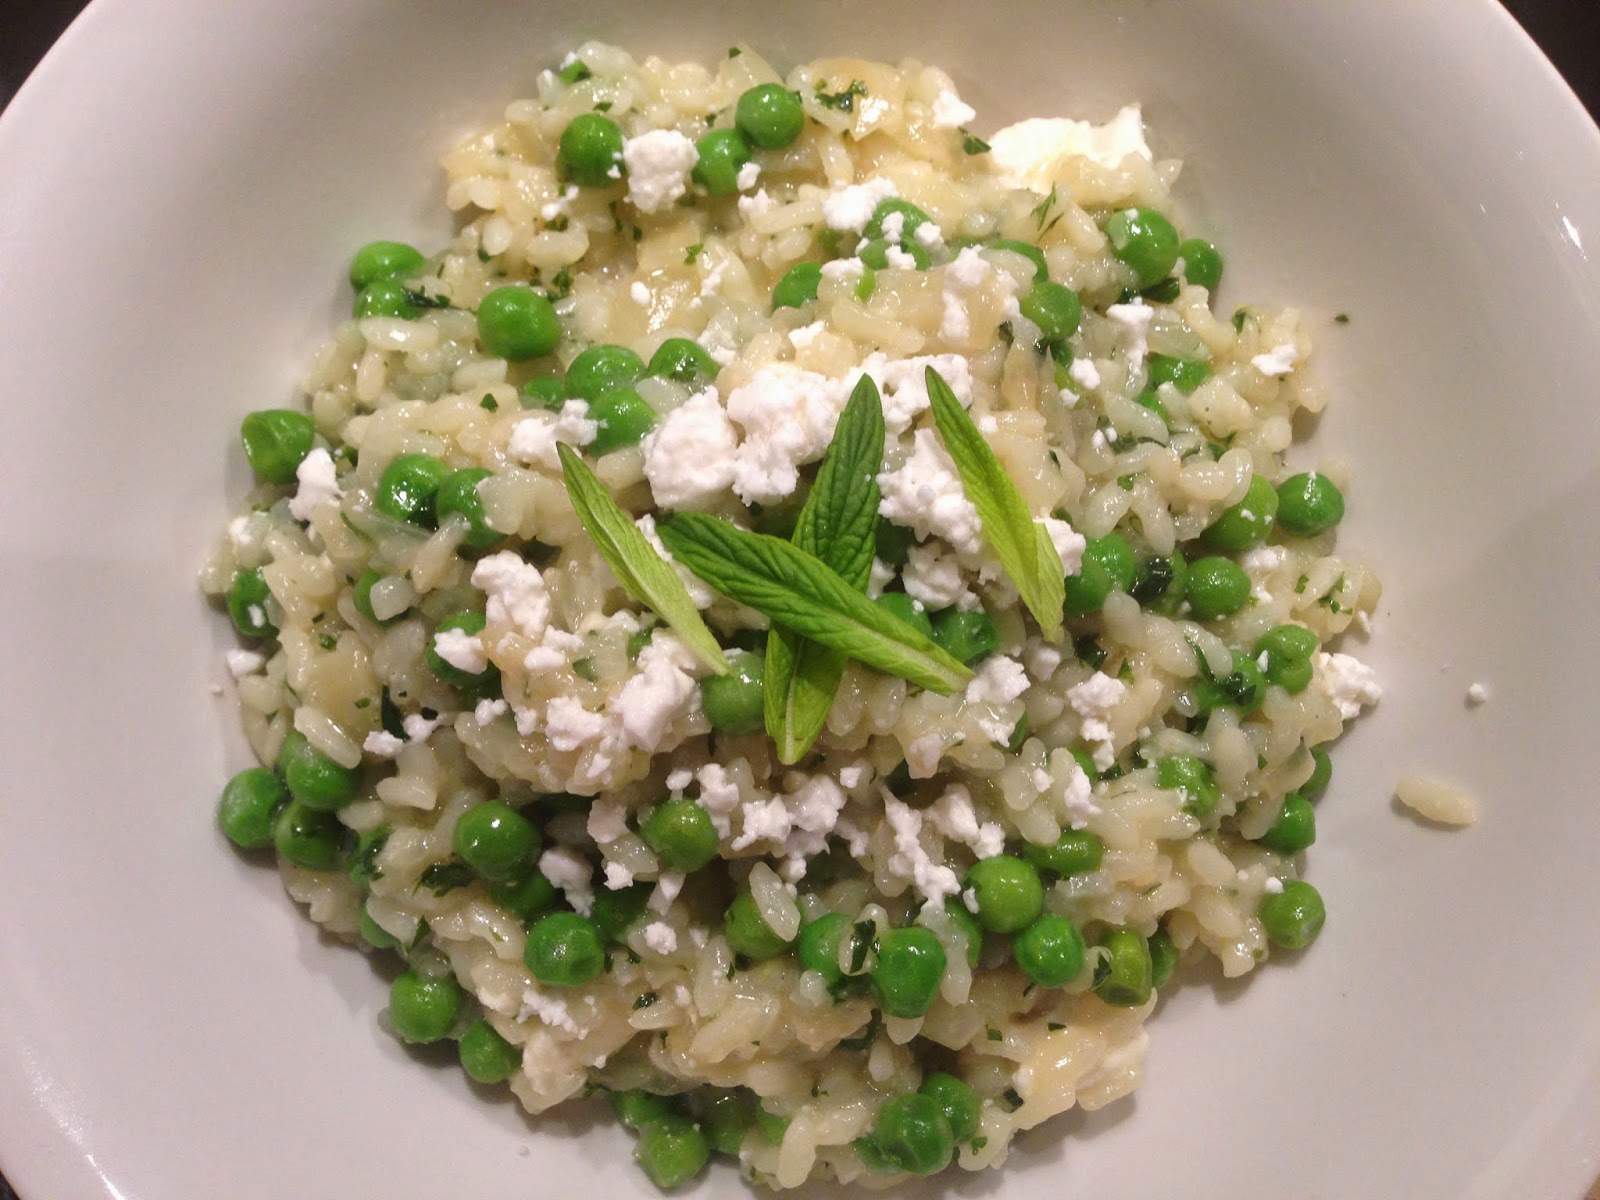 Jamie Oliver's Pea and Herb Risotto from Jamie Does.